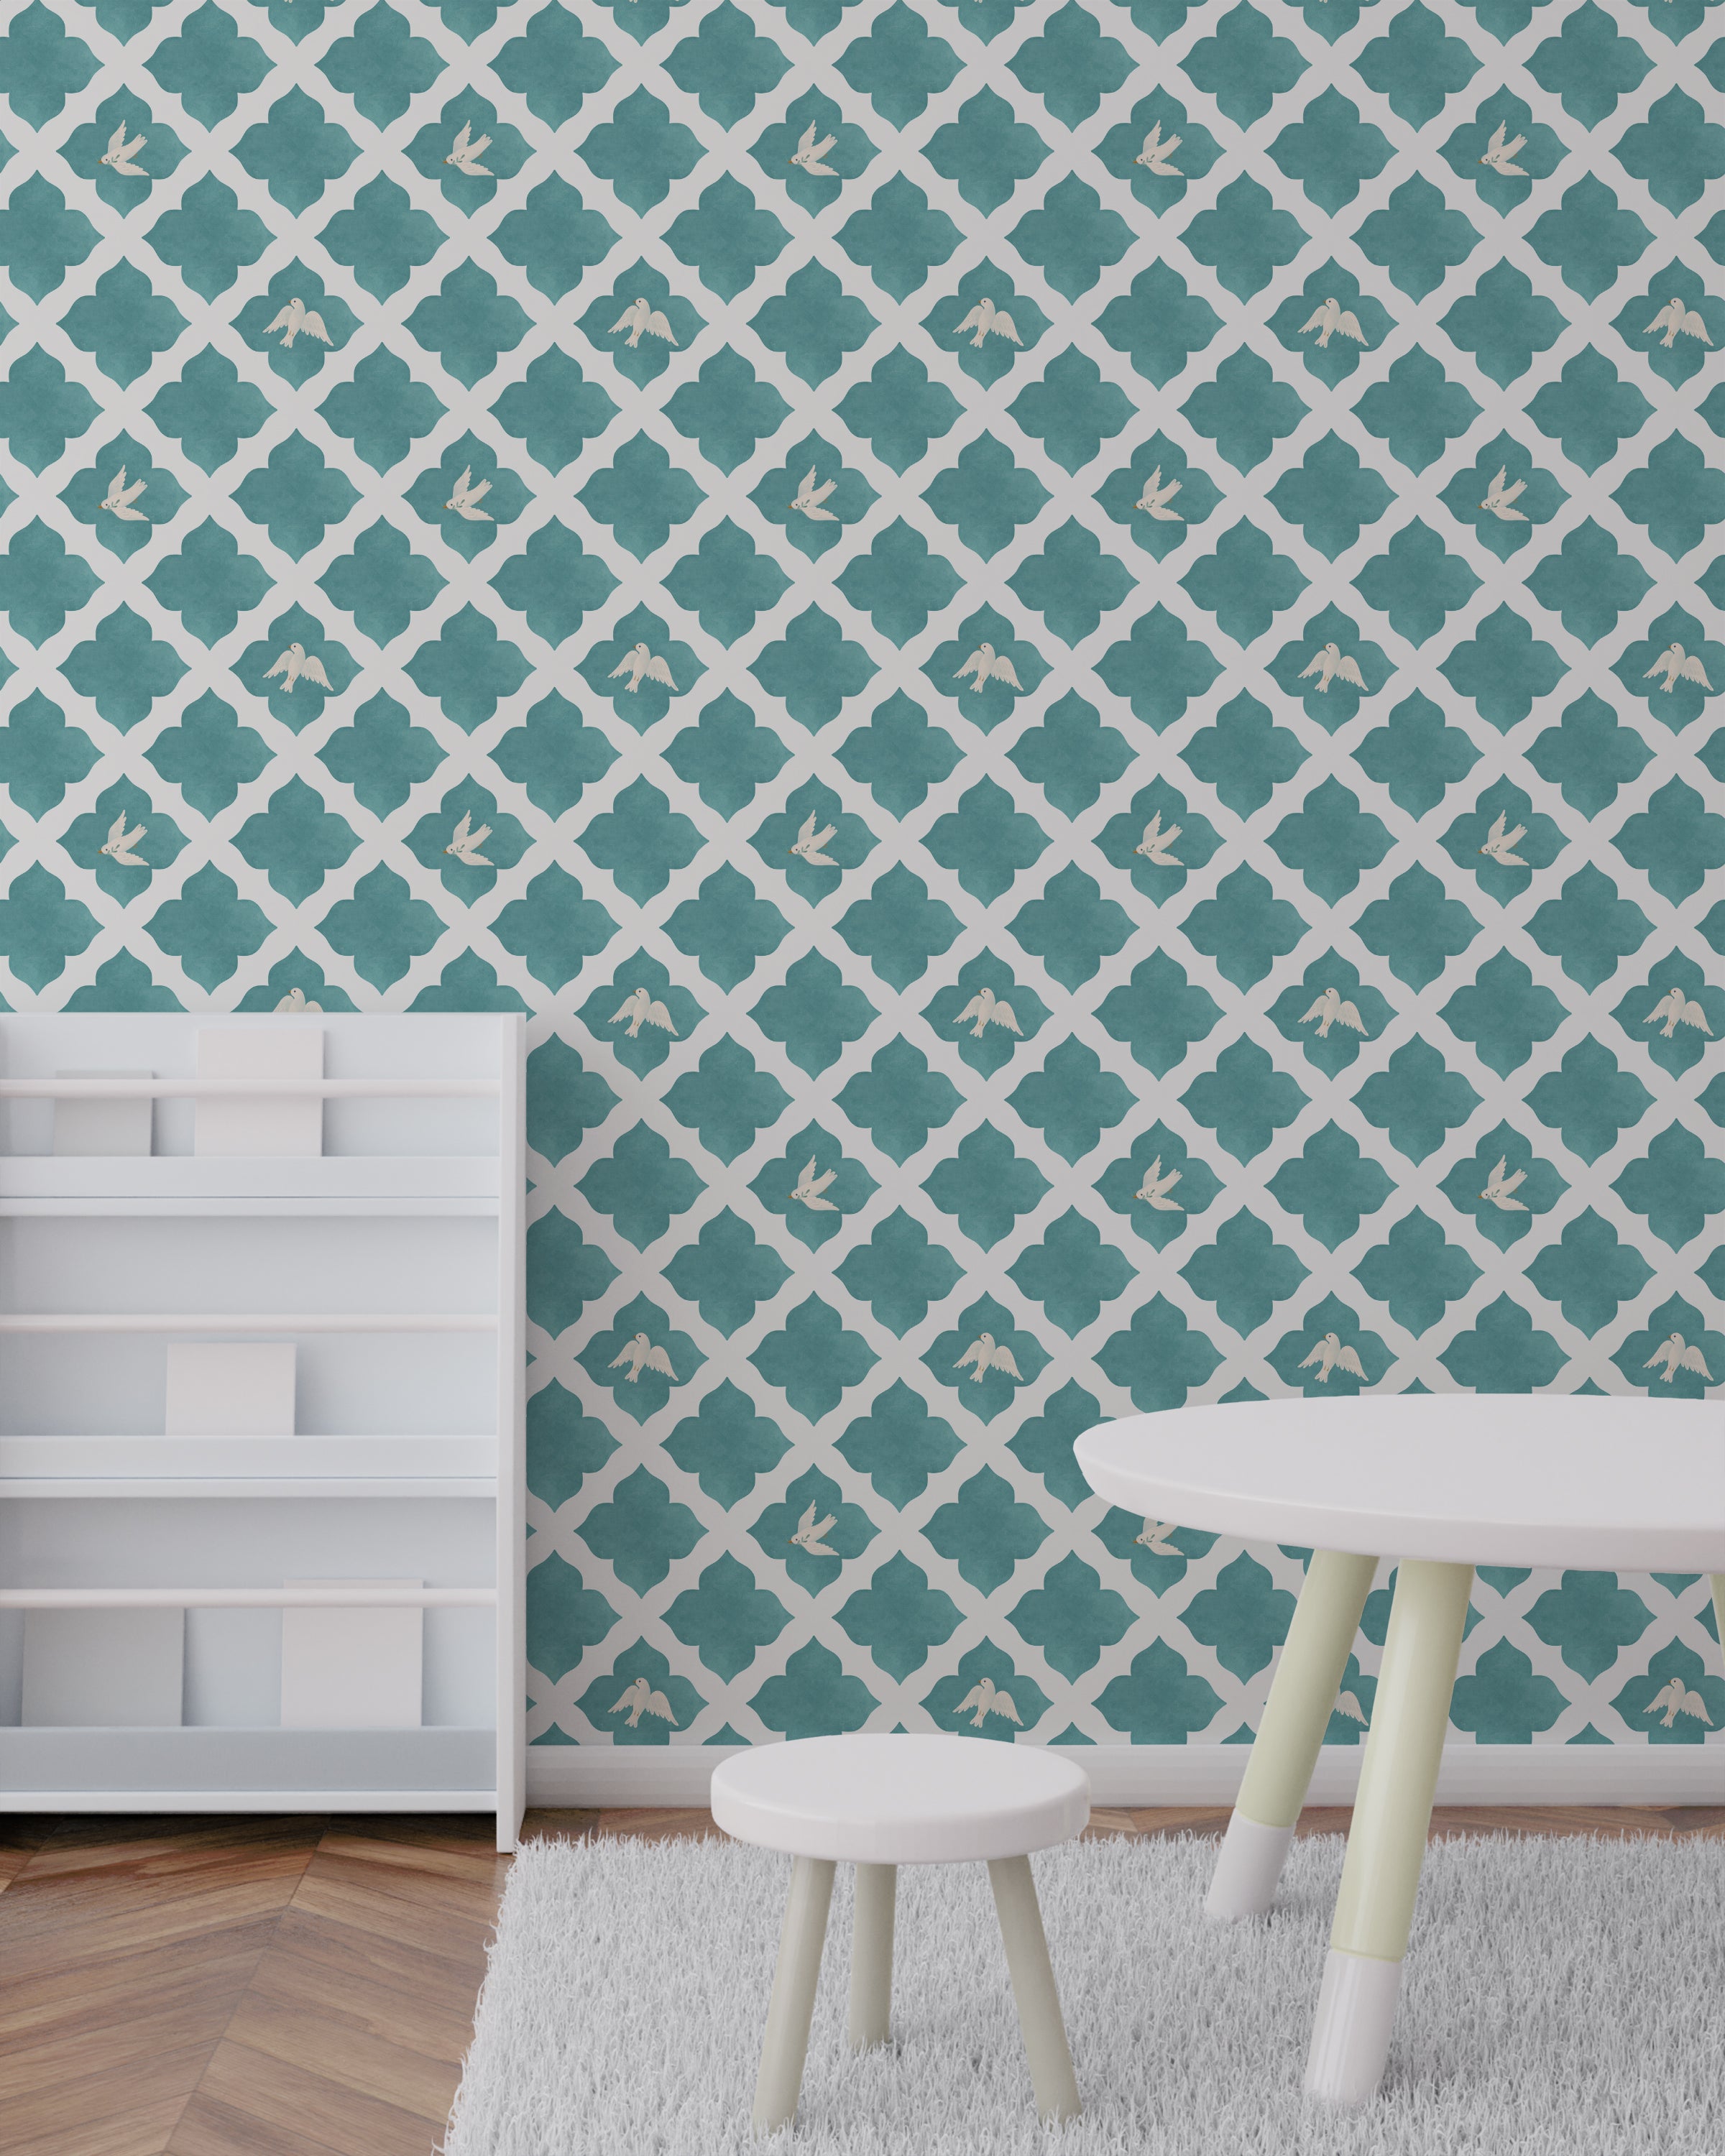 A children's room with walls adorned in Dove Mosaic Wallpaper showcasing a vibrant teal Moroccan tile pattern interspersed with white doves in various poses